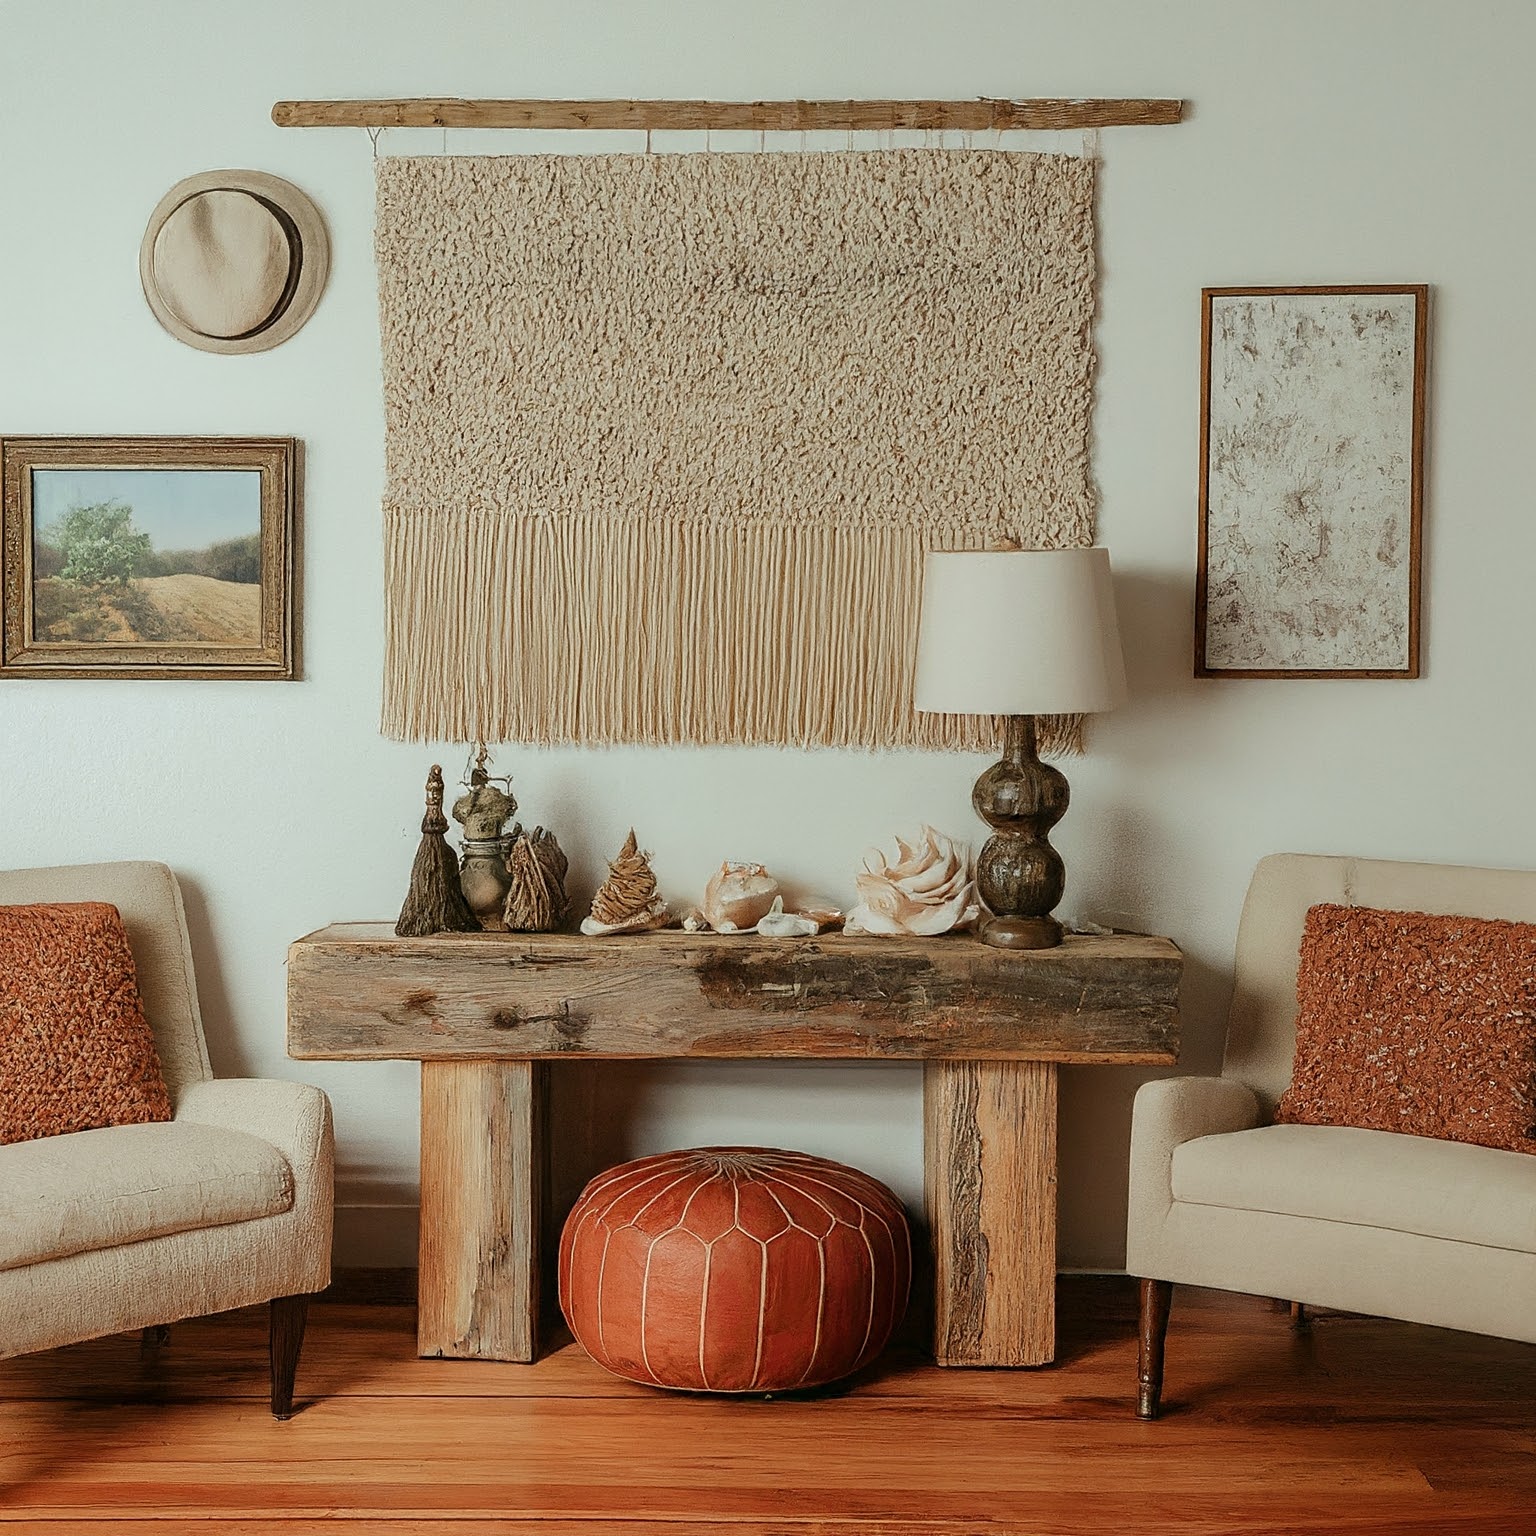 for a living room boho style : Bohemian accents like a hand-woven tapestry, collected seashells, and a macrame wall hanging personalize this living space.